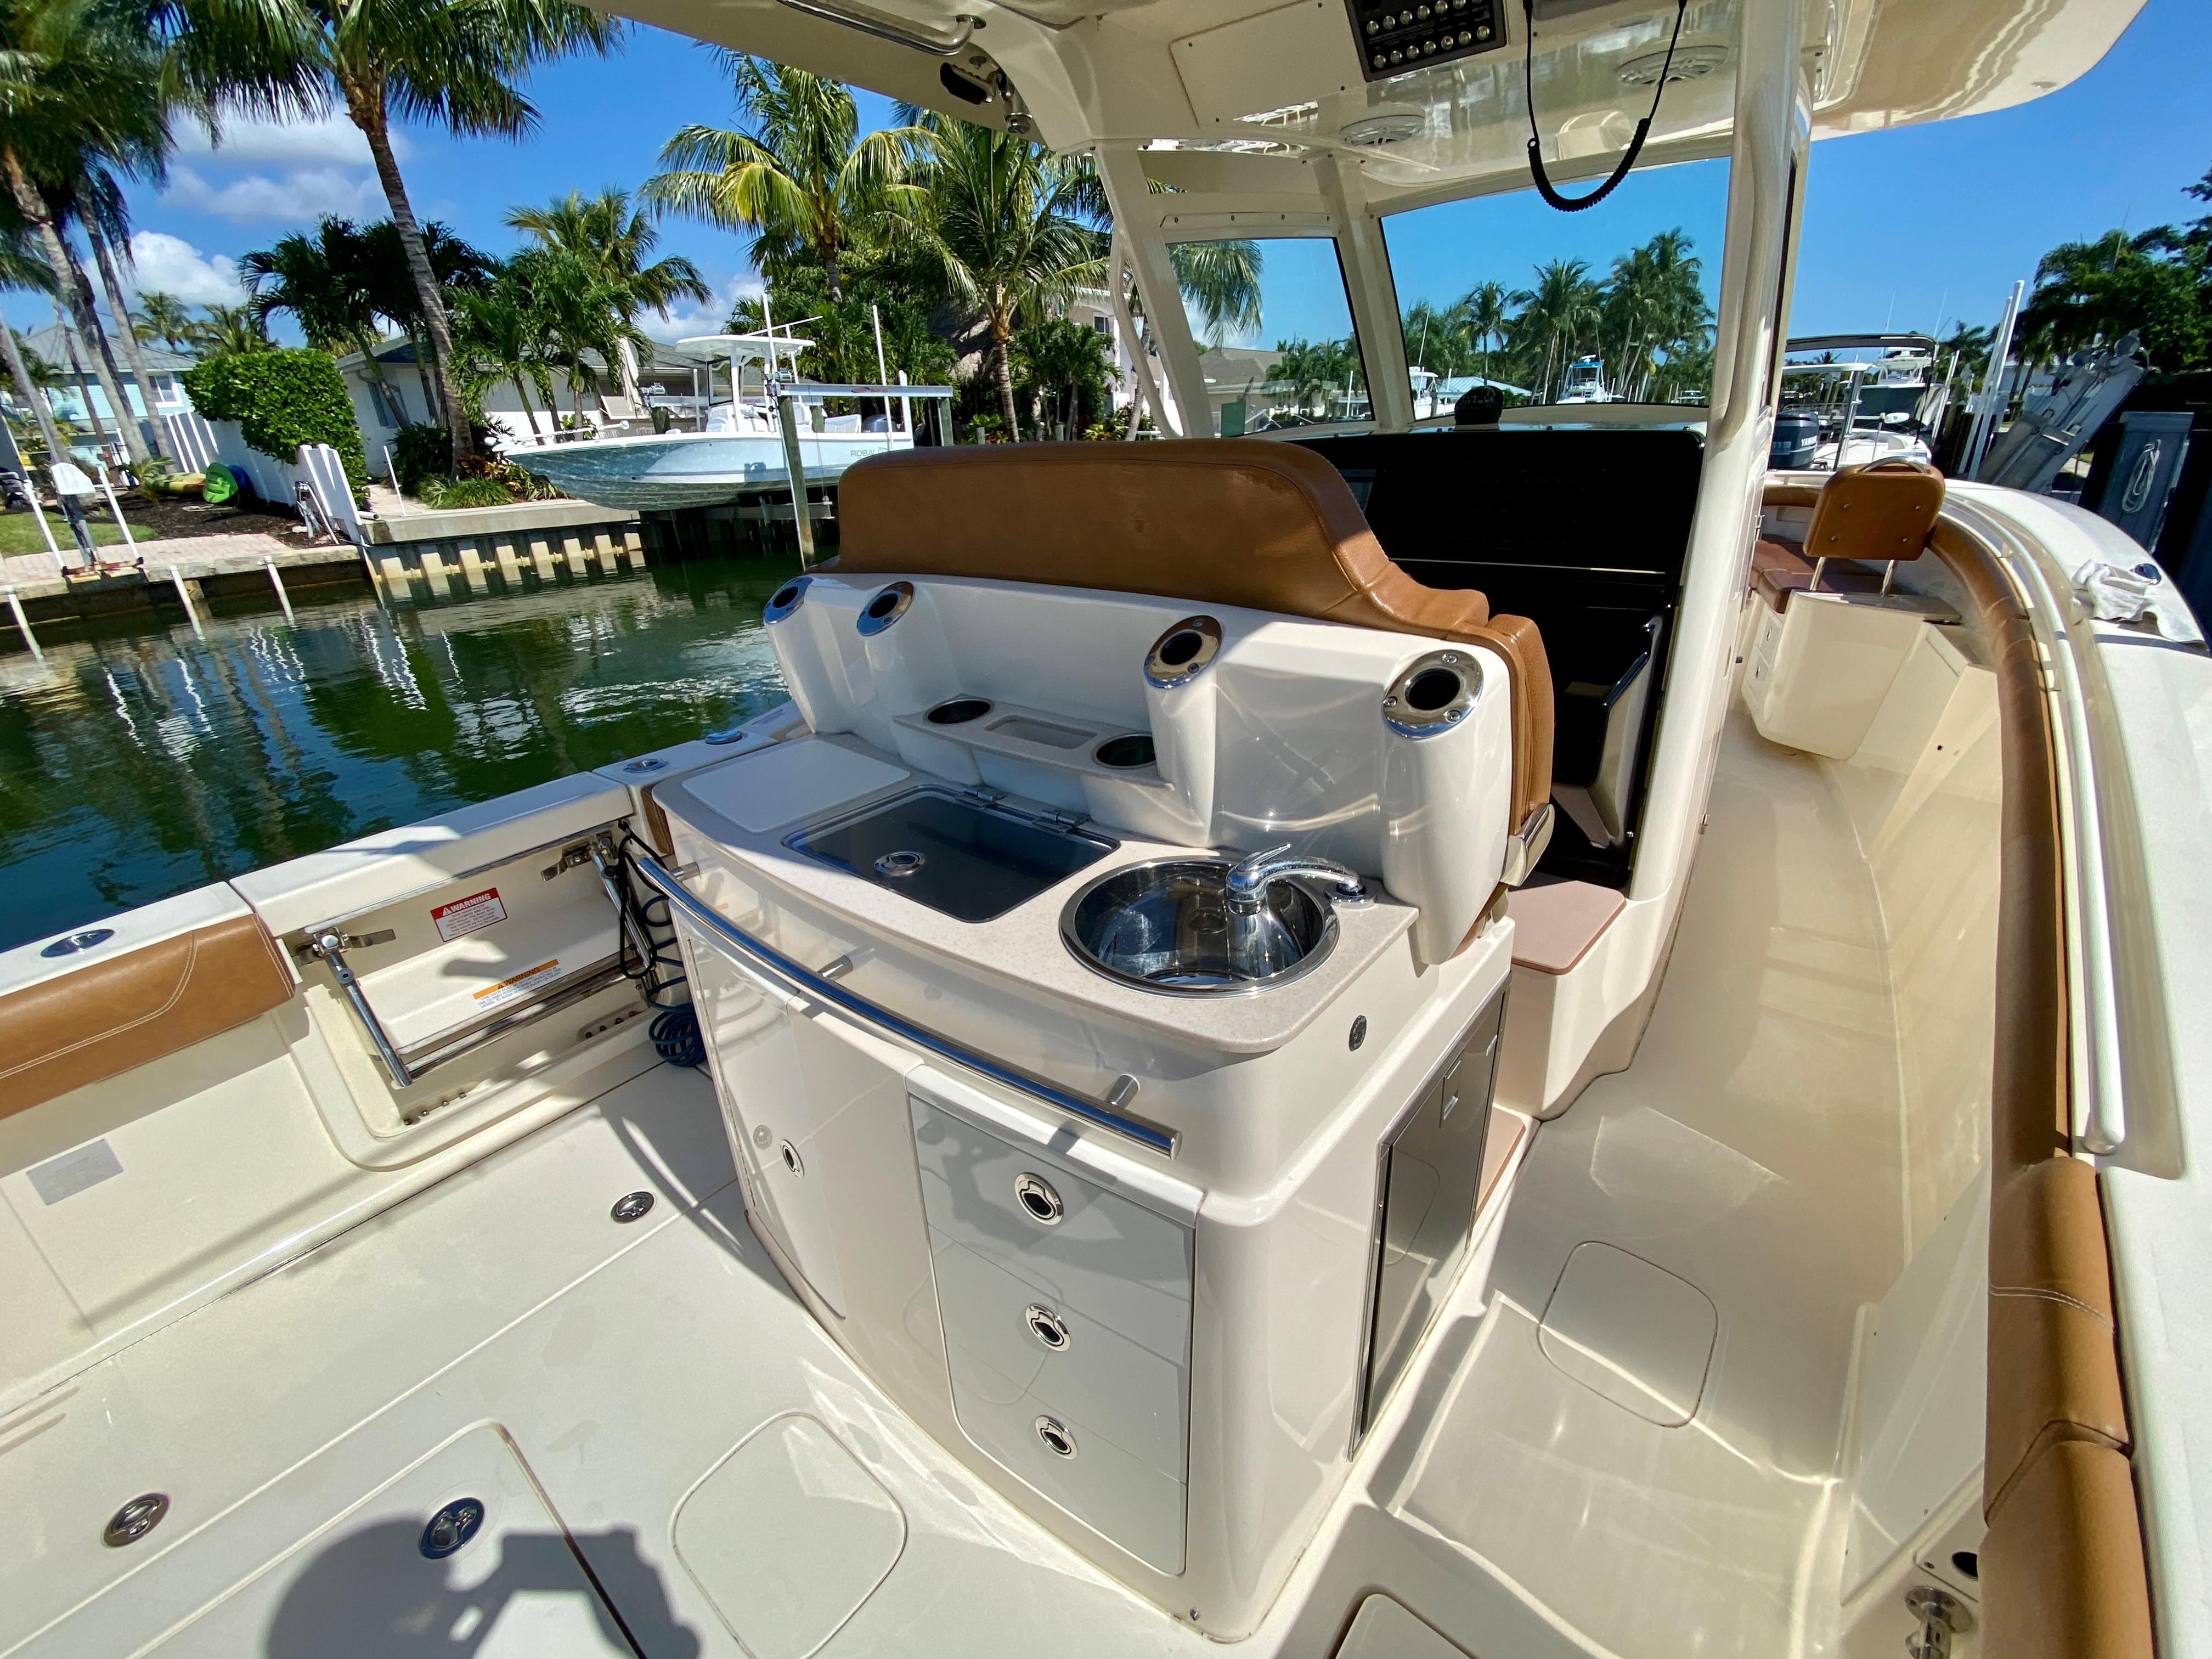 Scout 32 Pana Sea A - Leaning Post, Baitwell, Tackle Drawers, Cup Holders, Sink & Rod Holders